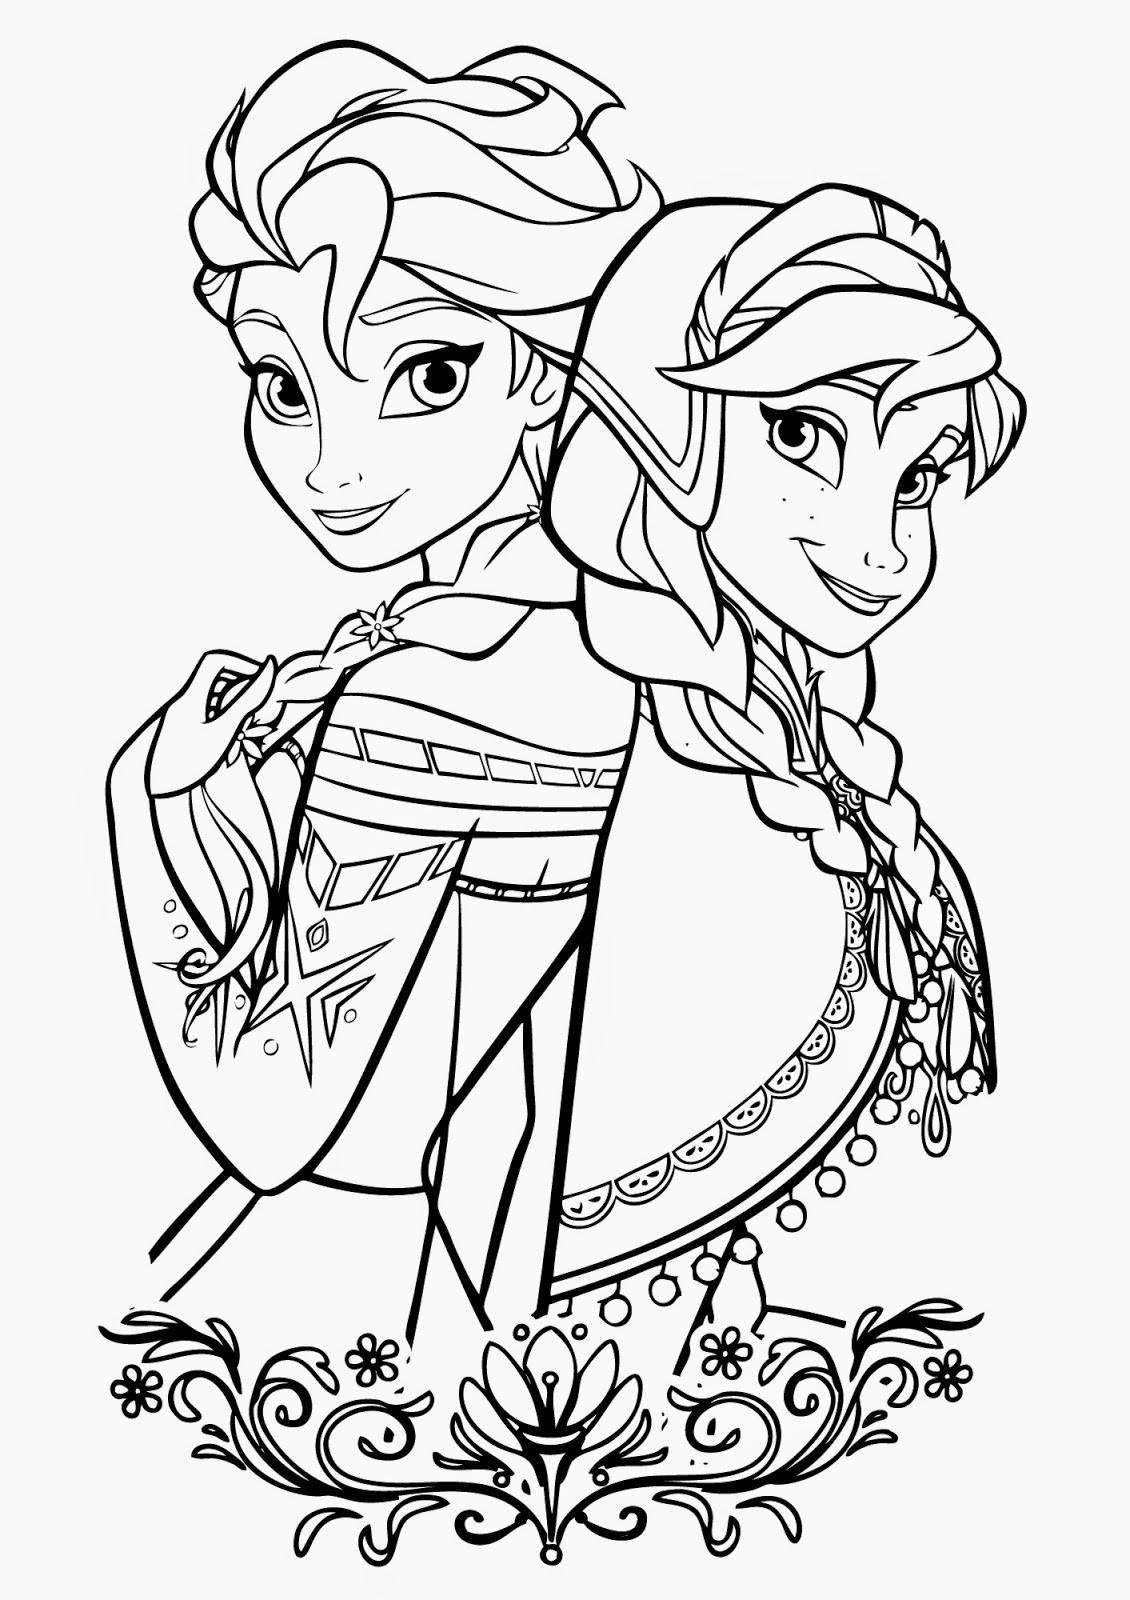 Printable Coloring Sheets Free
 Free Printable Elsa Coloring Pages for Kids Best